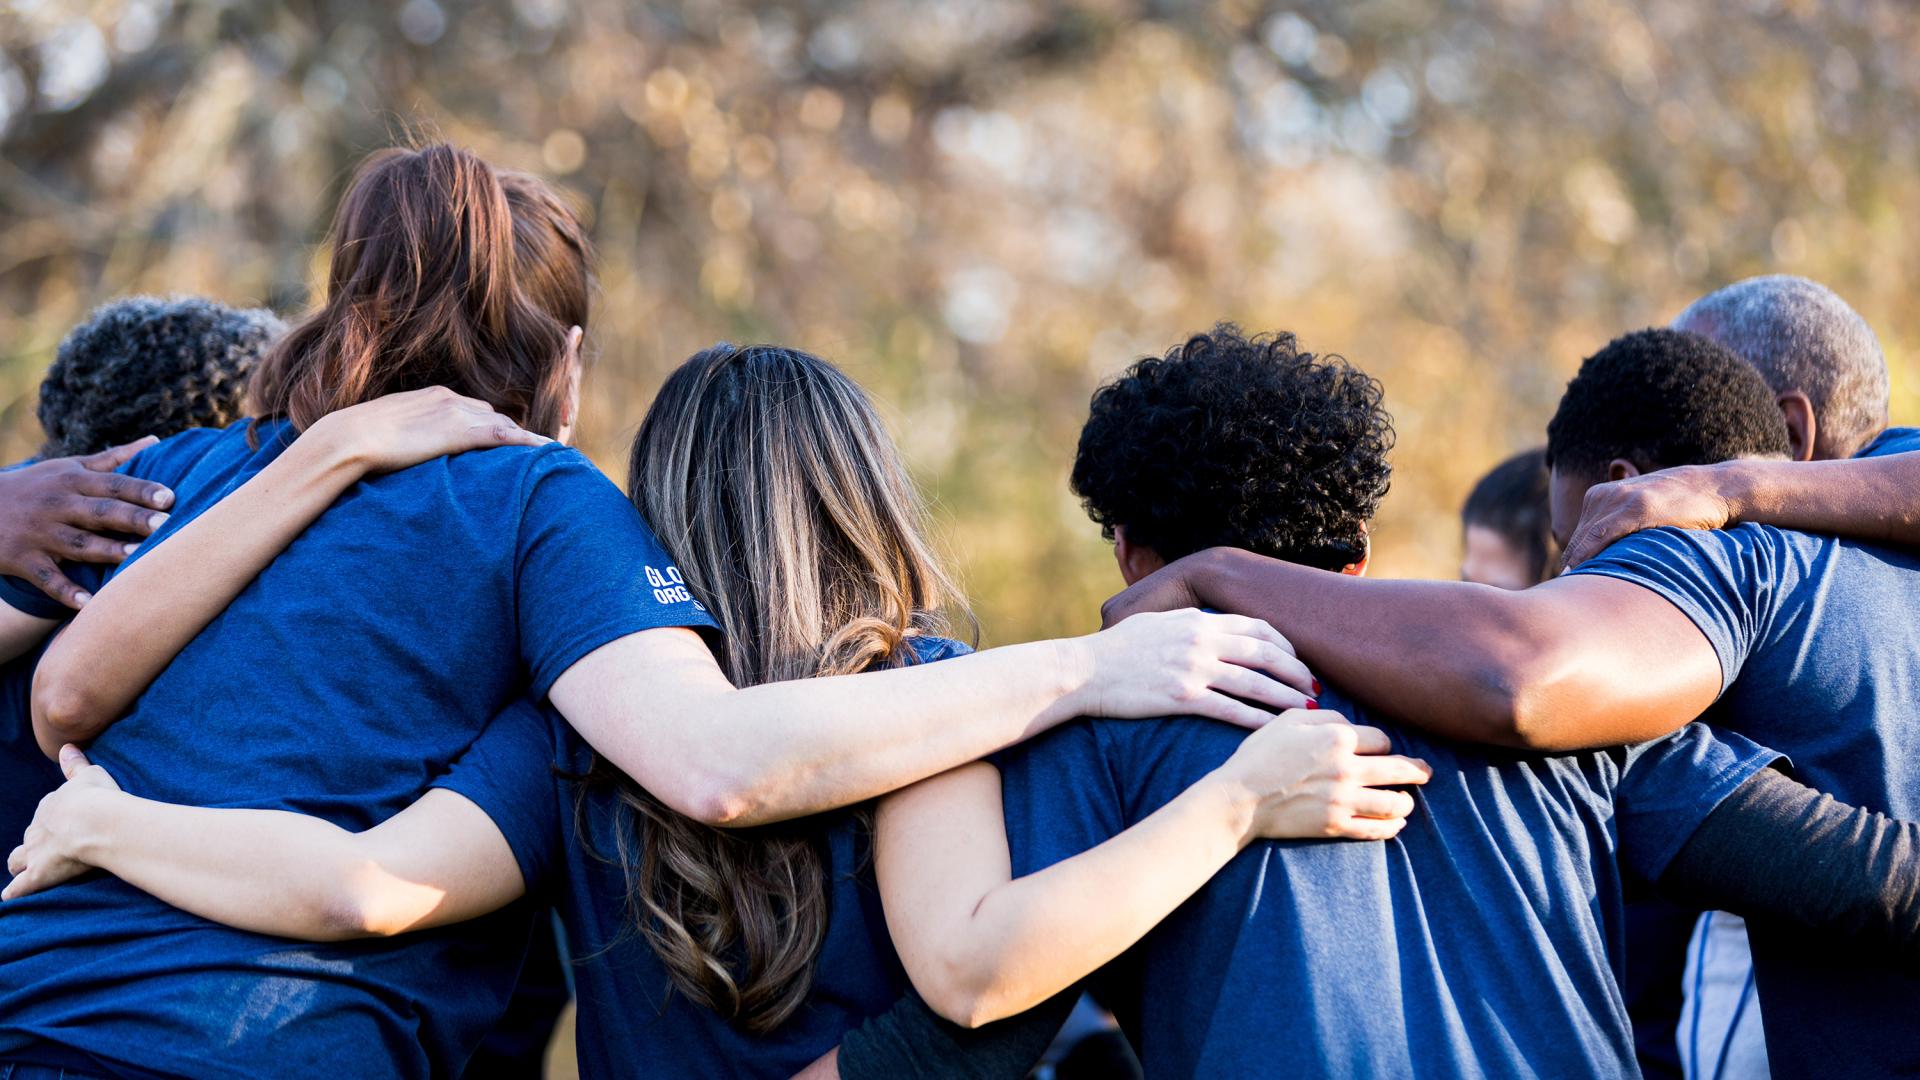 Diverse group of people wearing blue shirts shown from behind with arms around each other